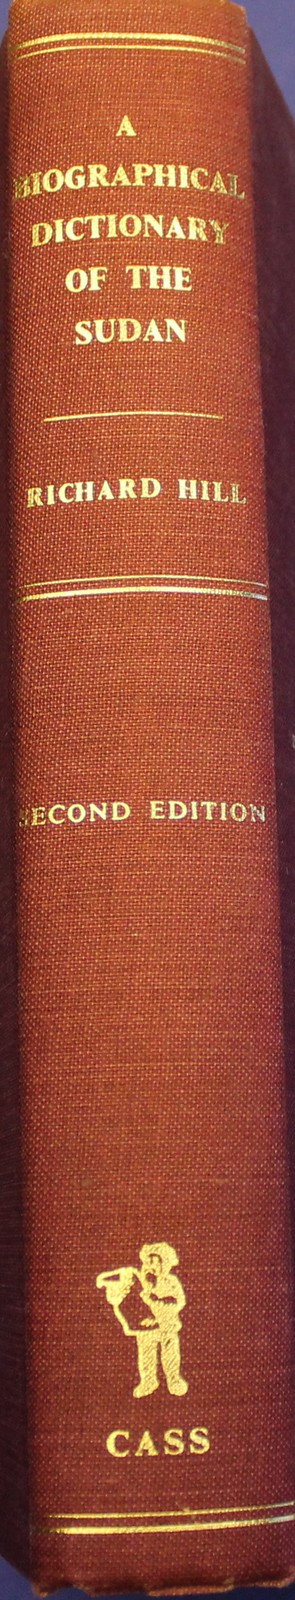 A Biographical Dictionary of the Sudan. Second edition. - HILL, RICHARD